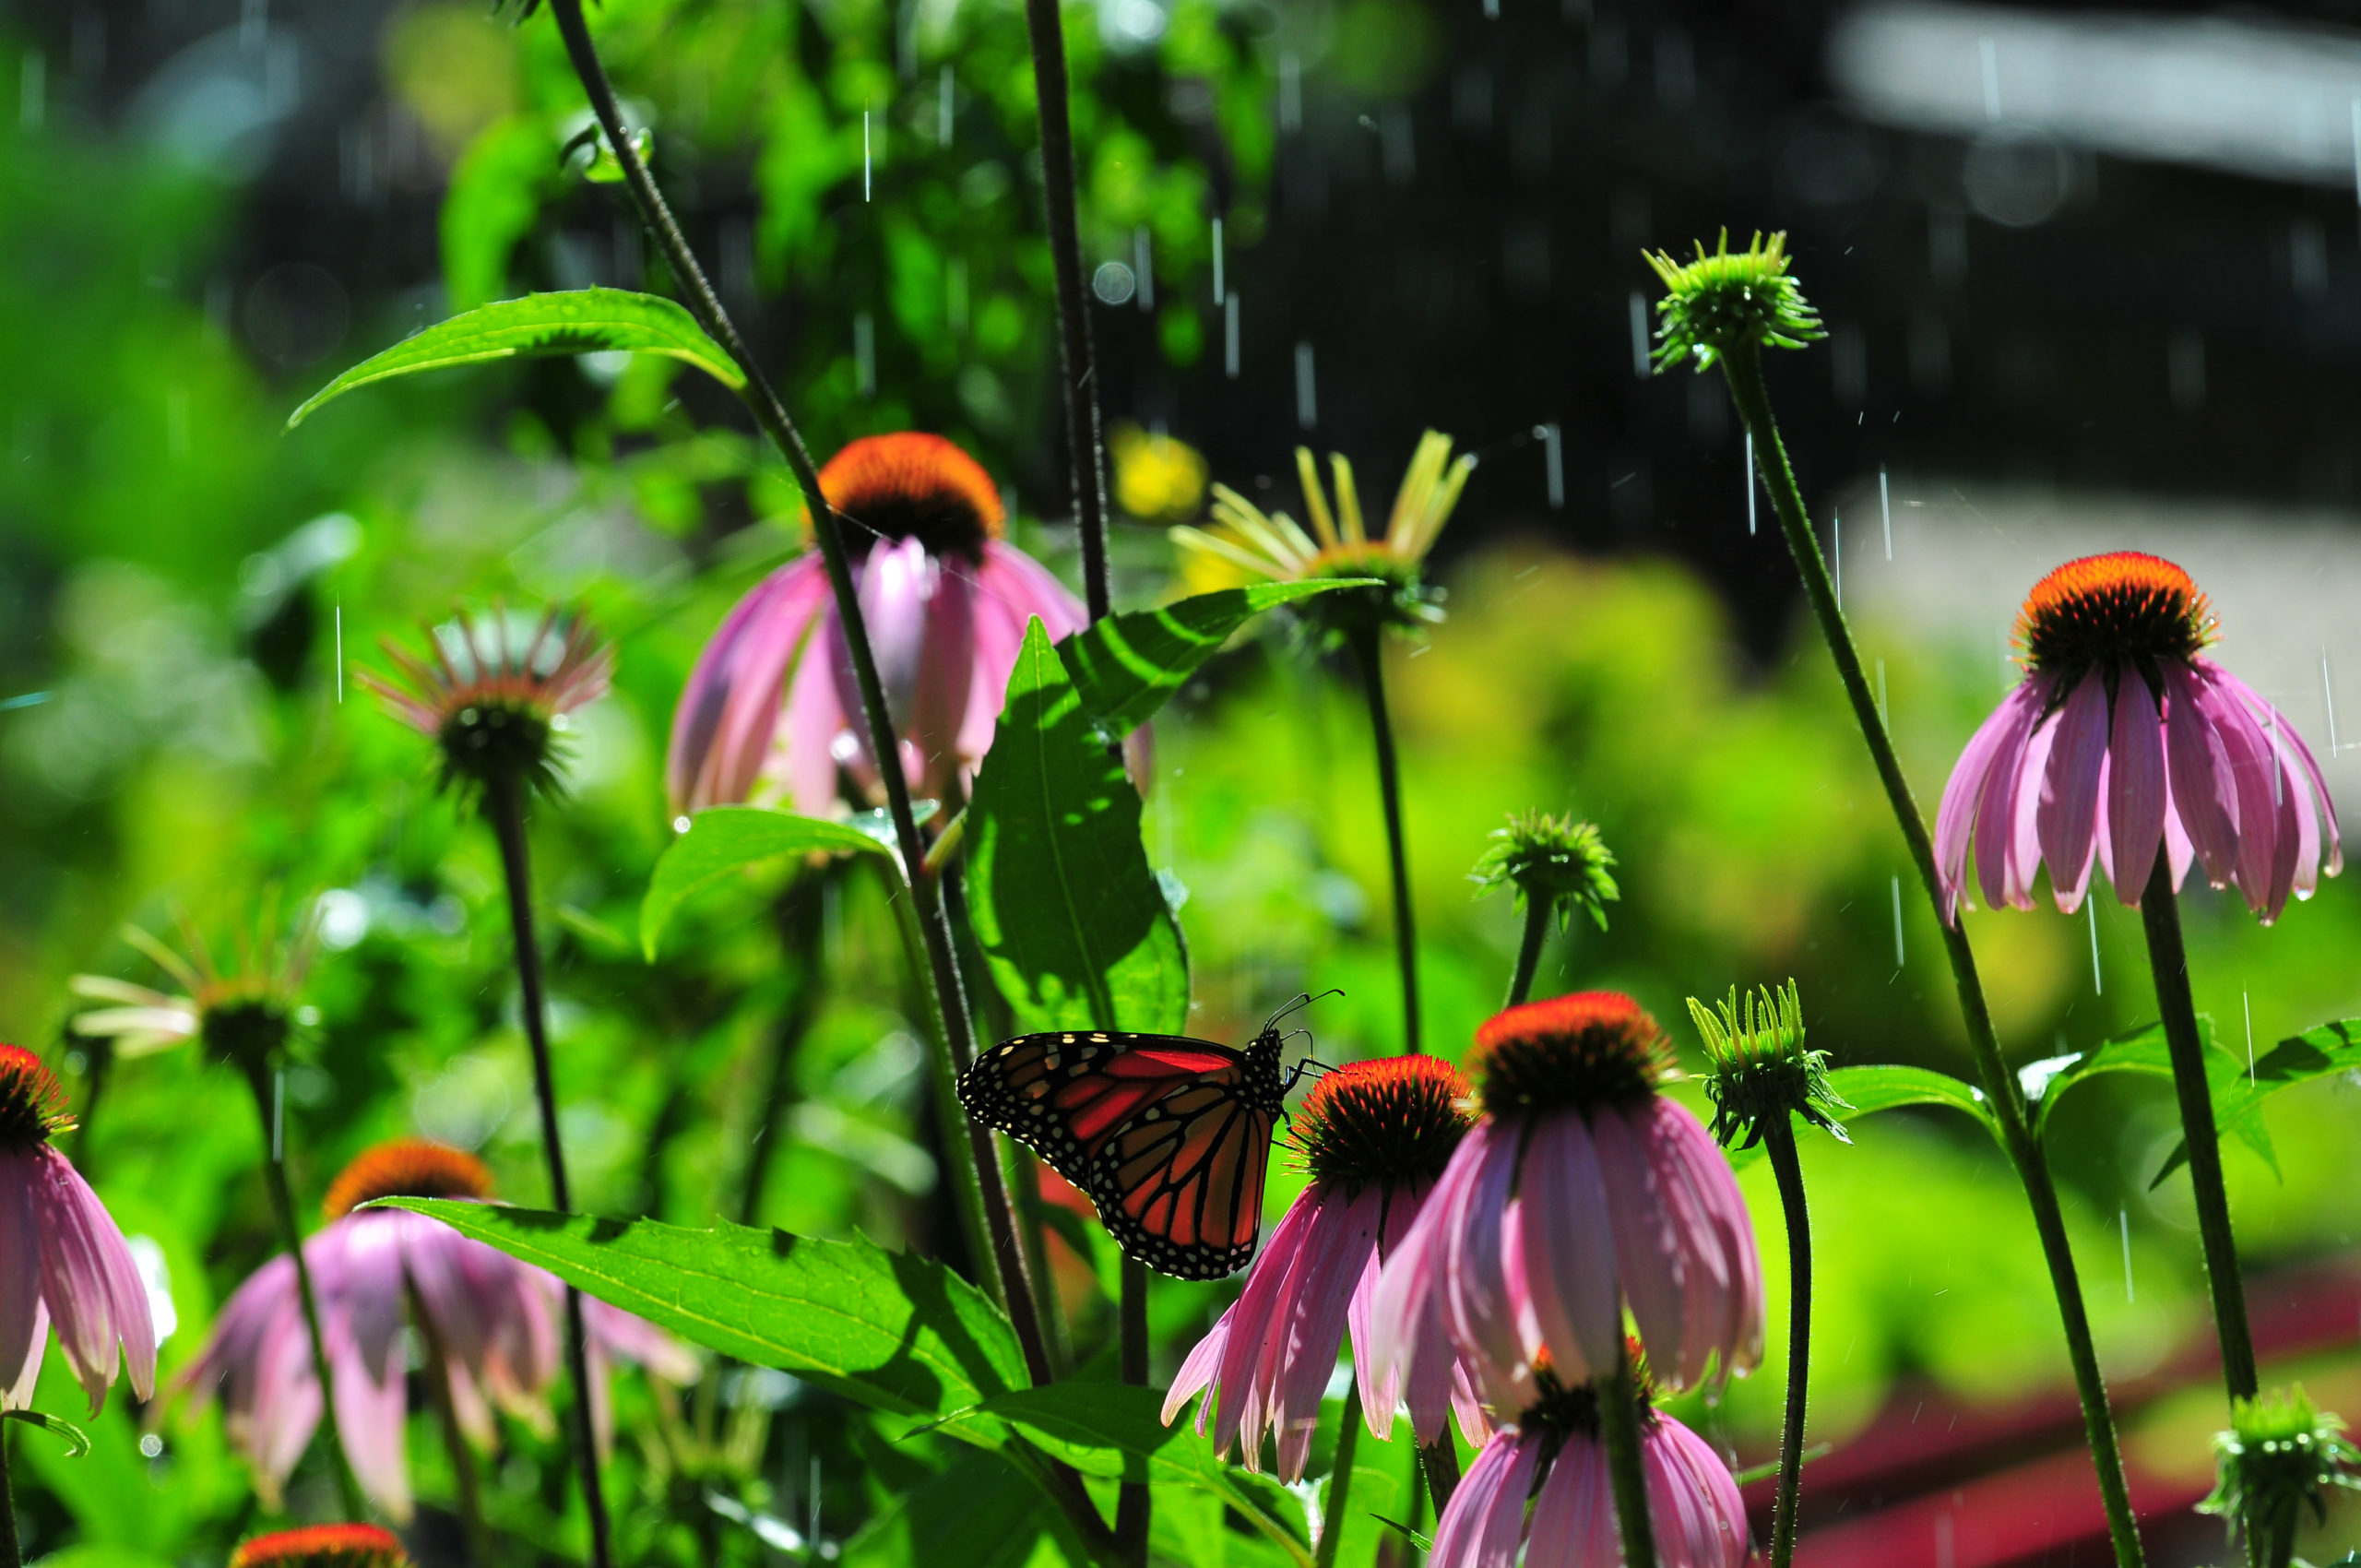 Monarch butterfly on Echinacea flowers, Ontario, Canada